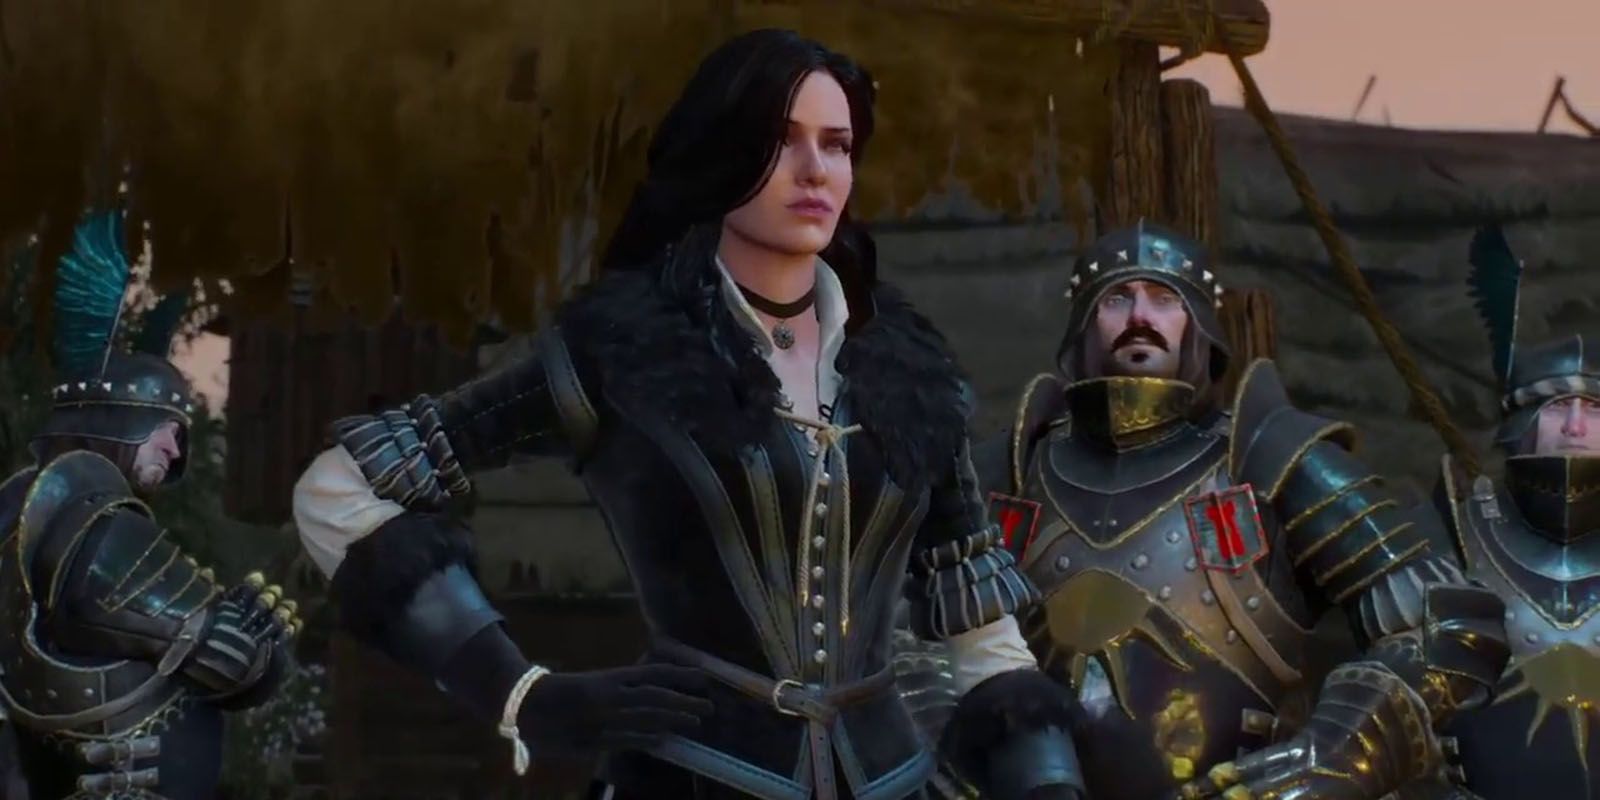 Meeting Yennefer in The Witcher 3